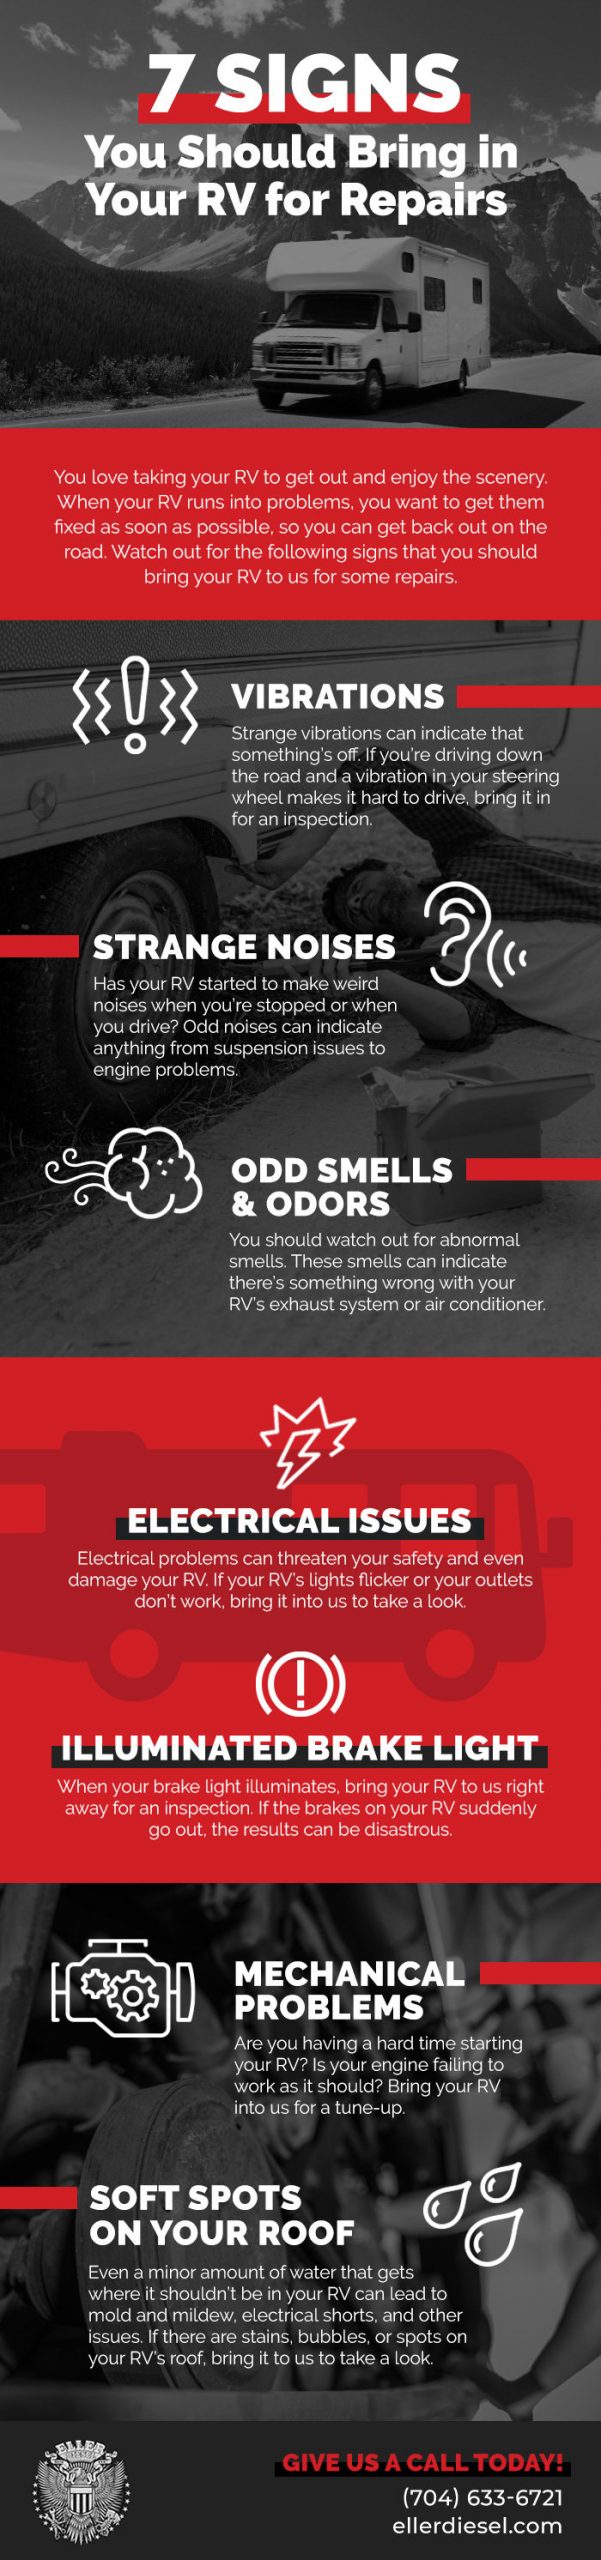 7 Signs You Should Bring in Your RV for Repairs [infographic]